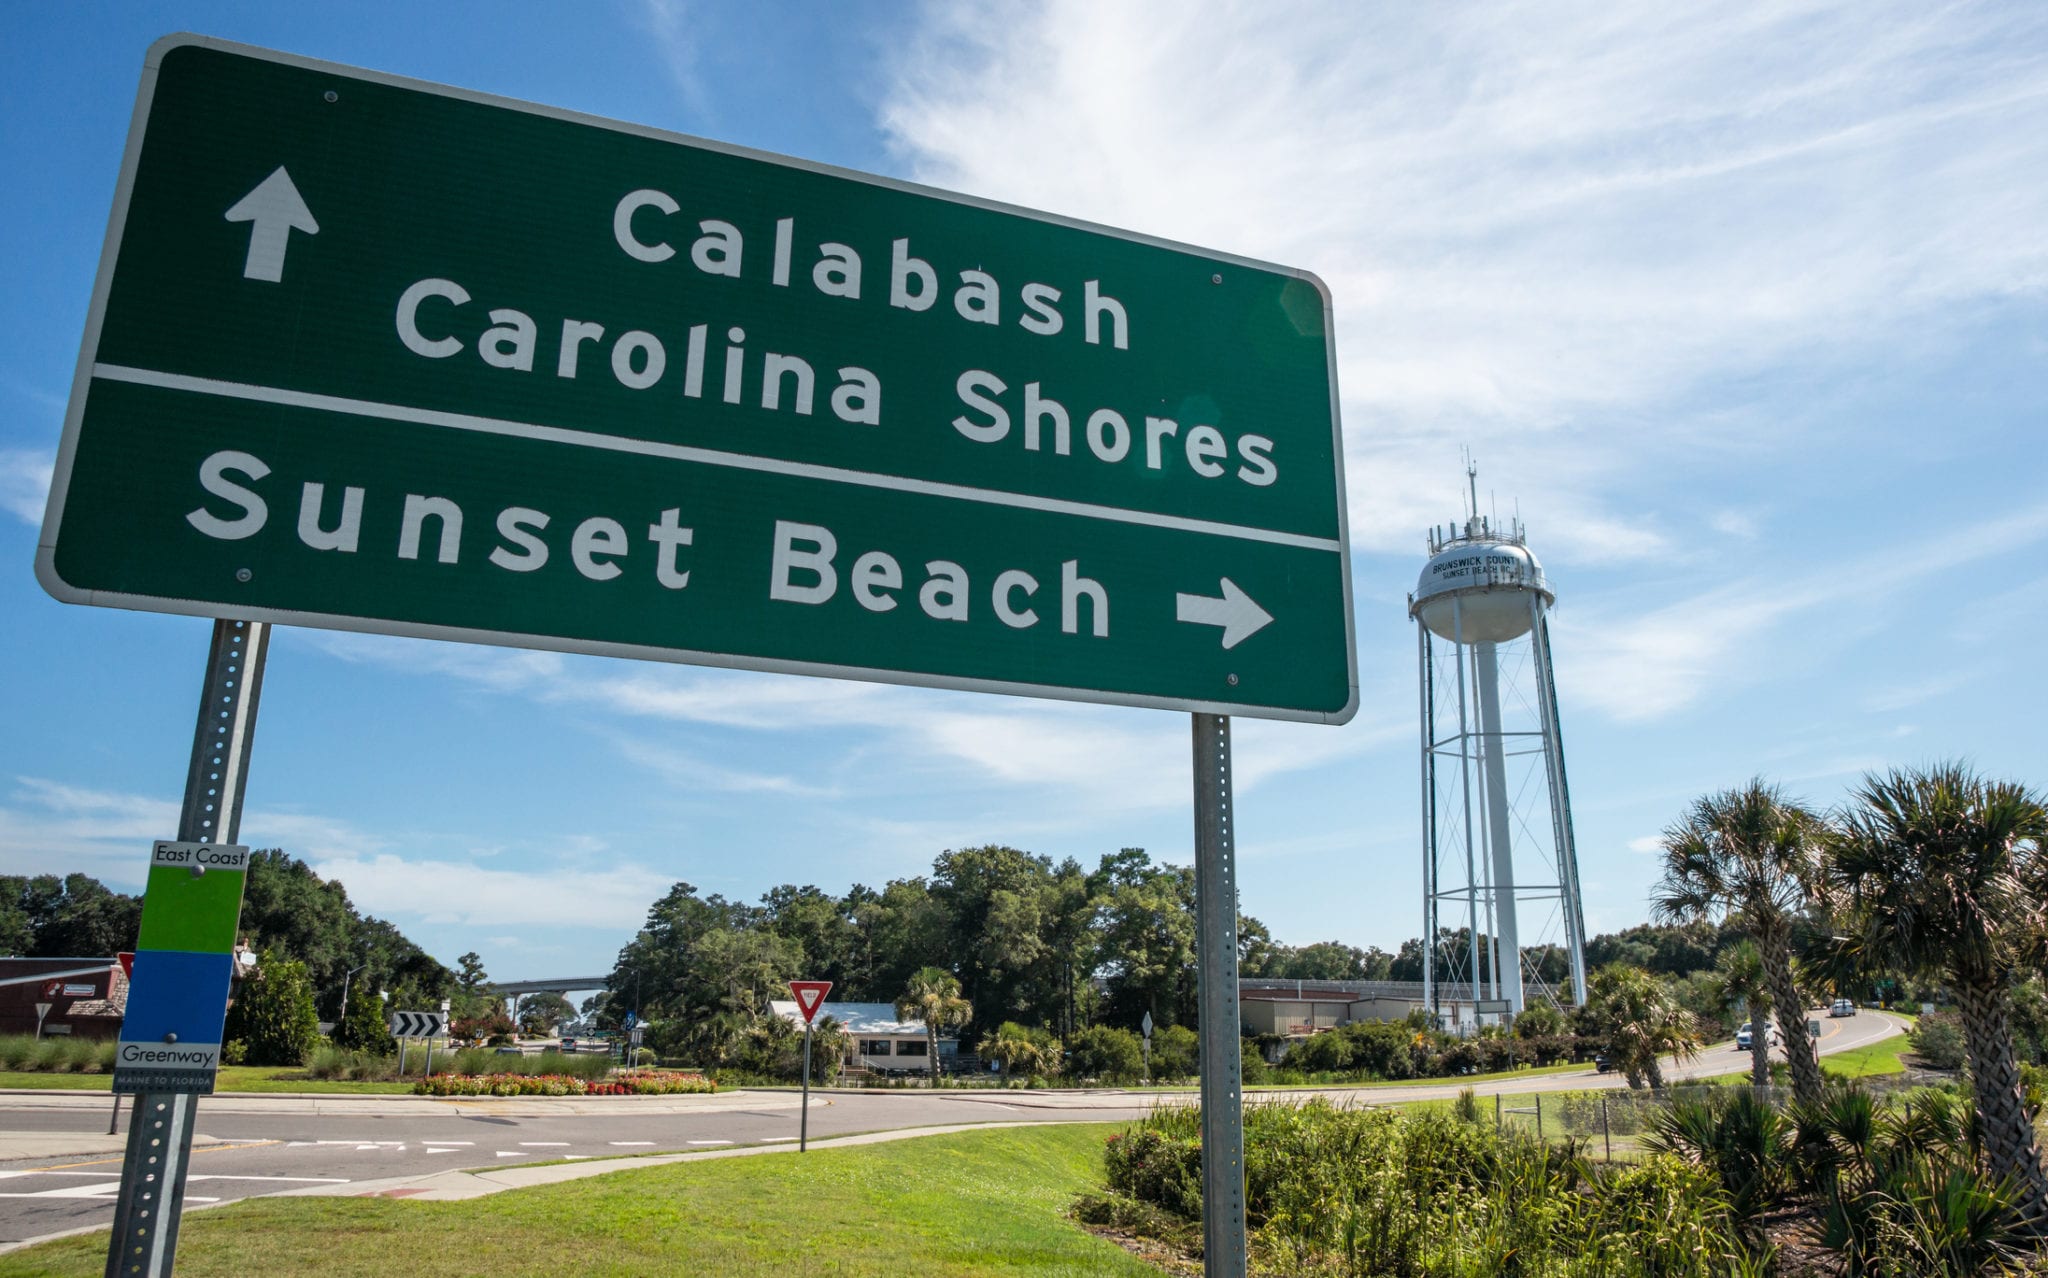 Sign to Calabash heading from Myrtle Beach.